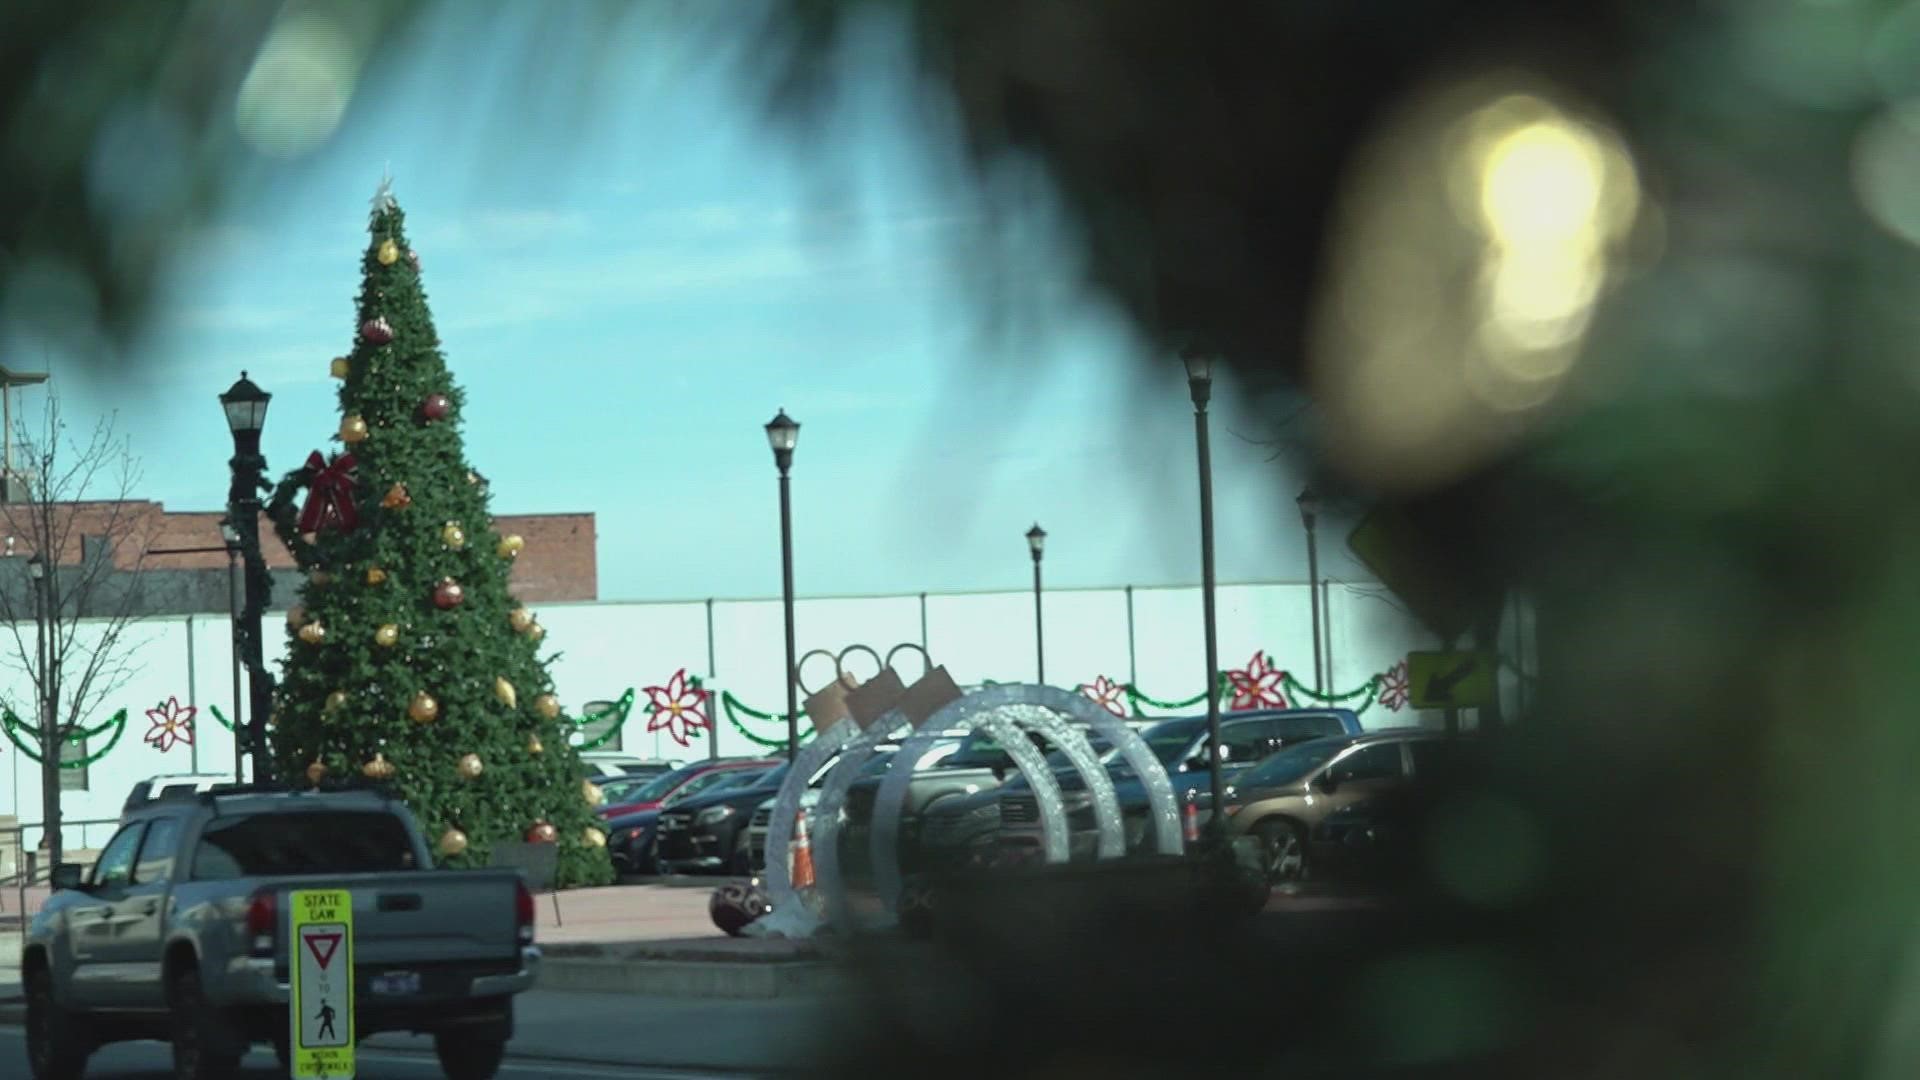 10News reporter Katie Inman lives out her Hallmark movie dream in downtown Maryville!